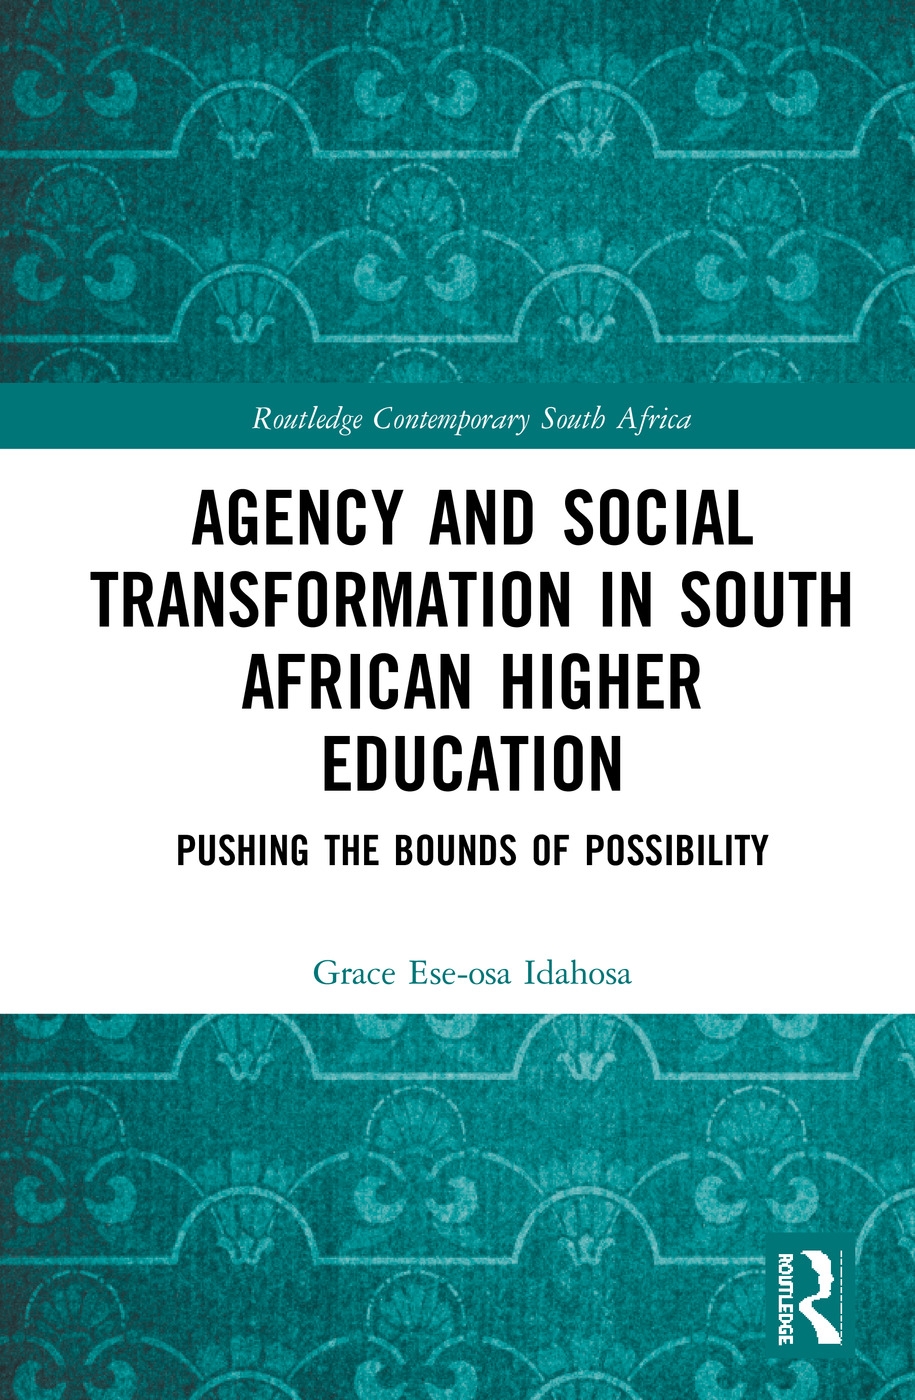 Agency and Social Transformation in South African Higher Education: Pushing the Bounds of Possibility